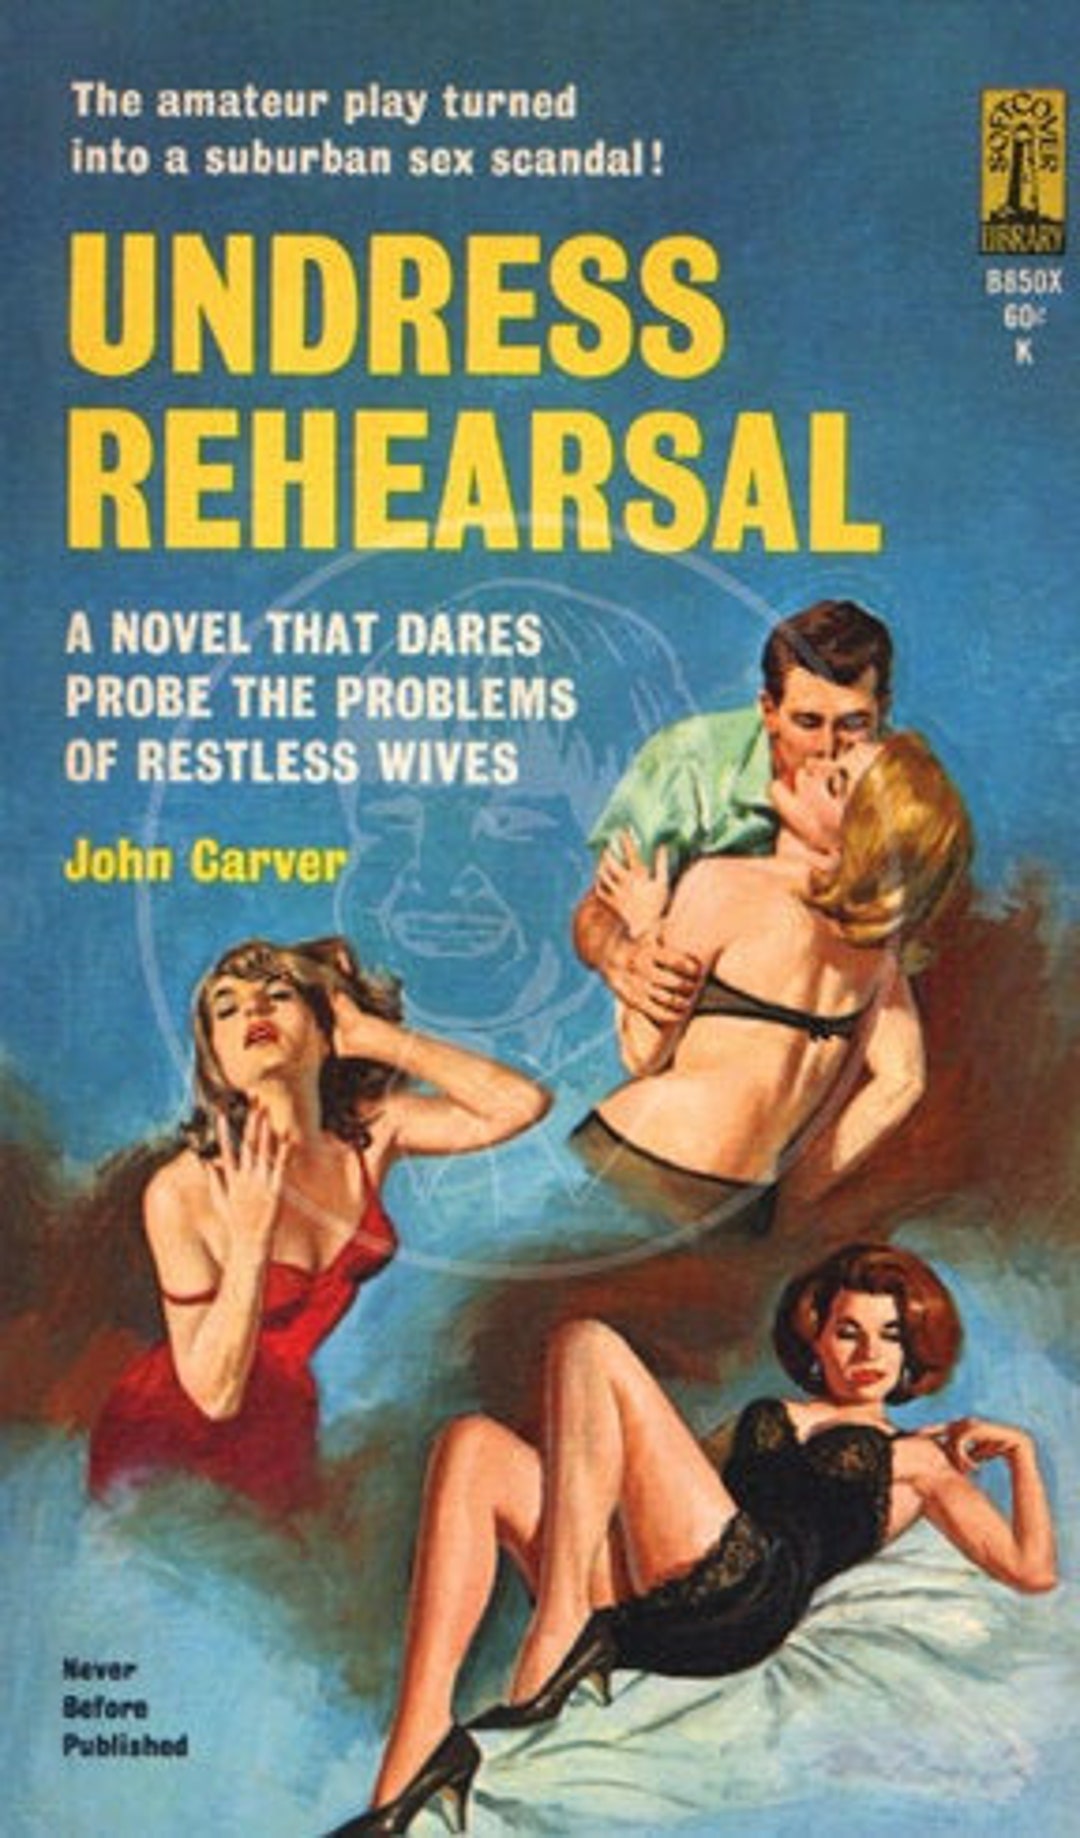 Undress Rehearsal 10x17 Giclée Canvas Print of a Vintage Pulp image